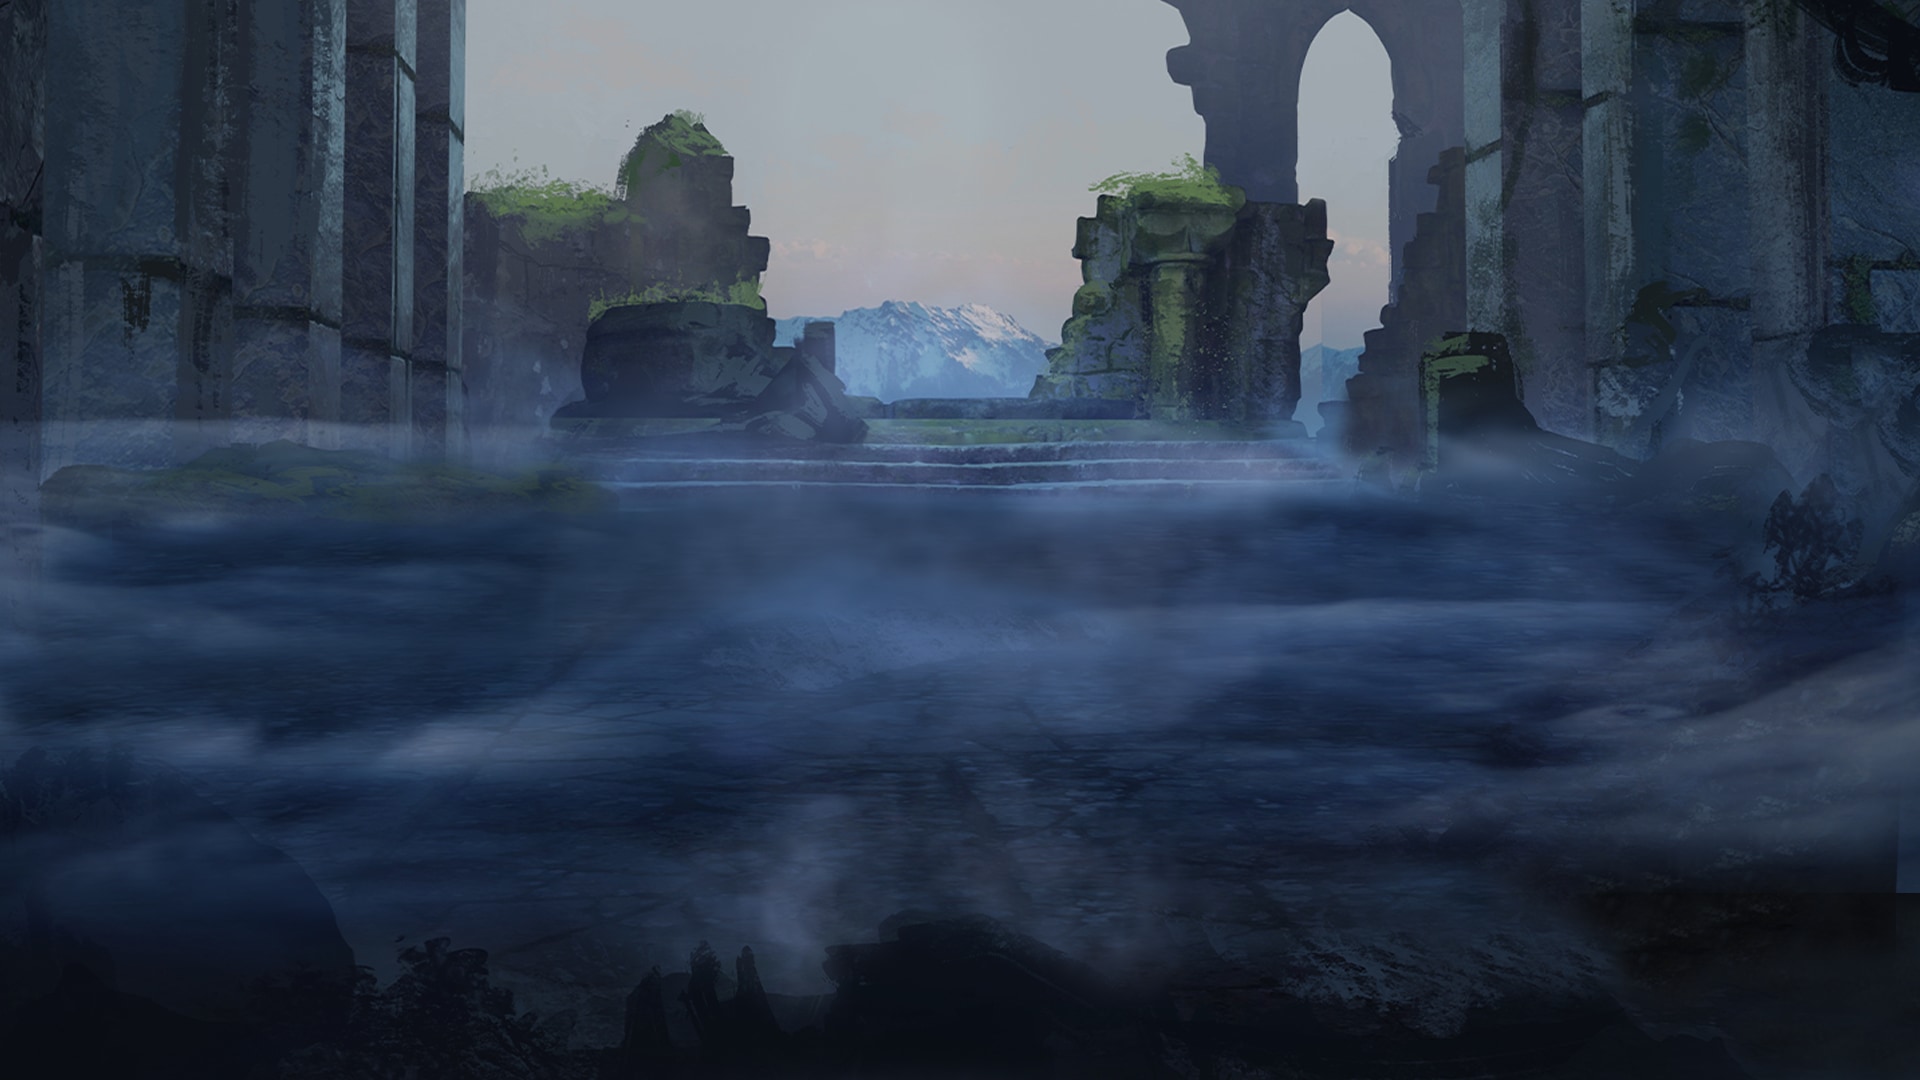 Fog clears to reveal ancient ruins.